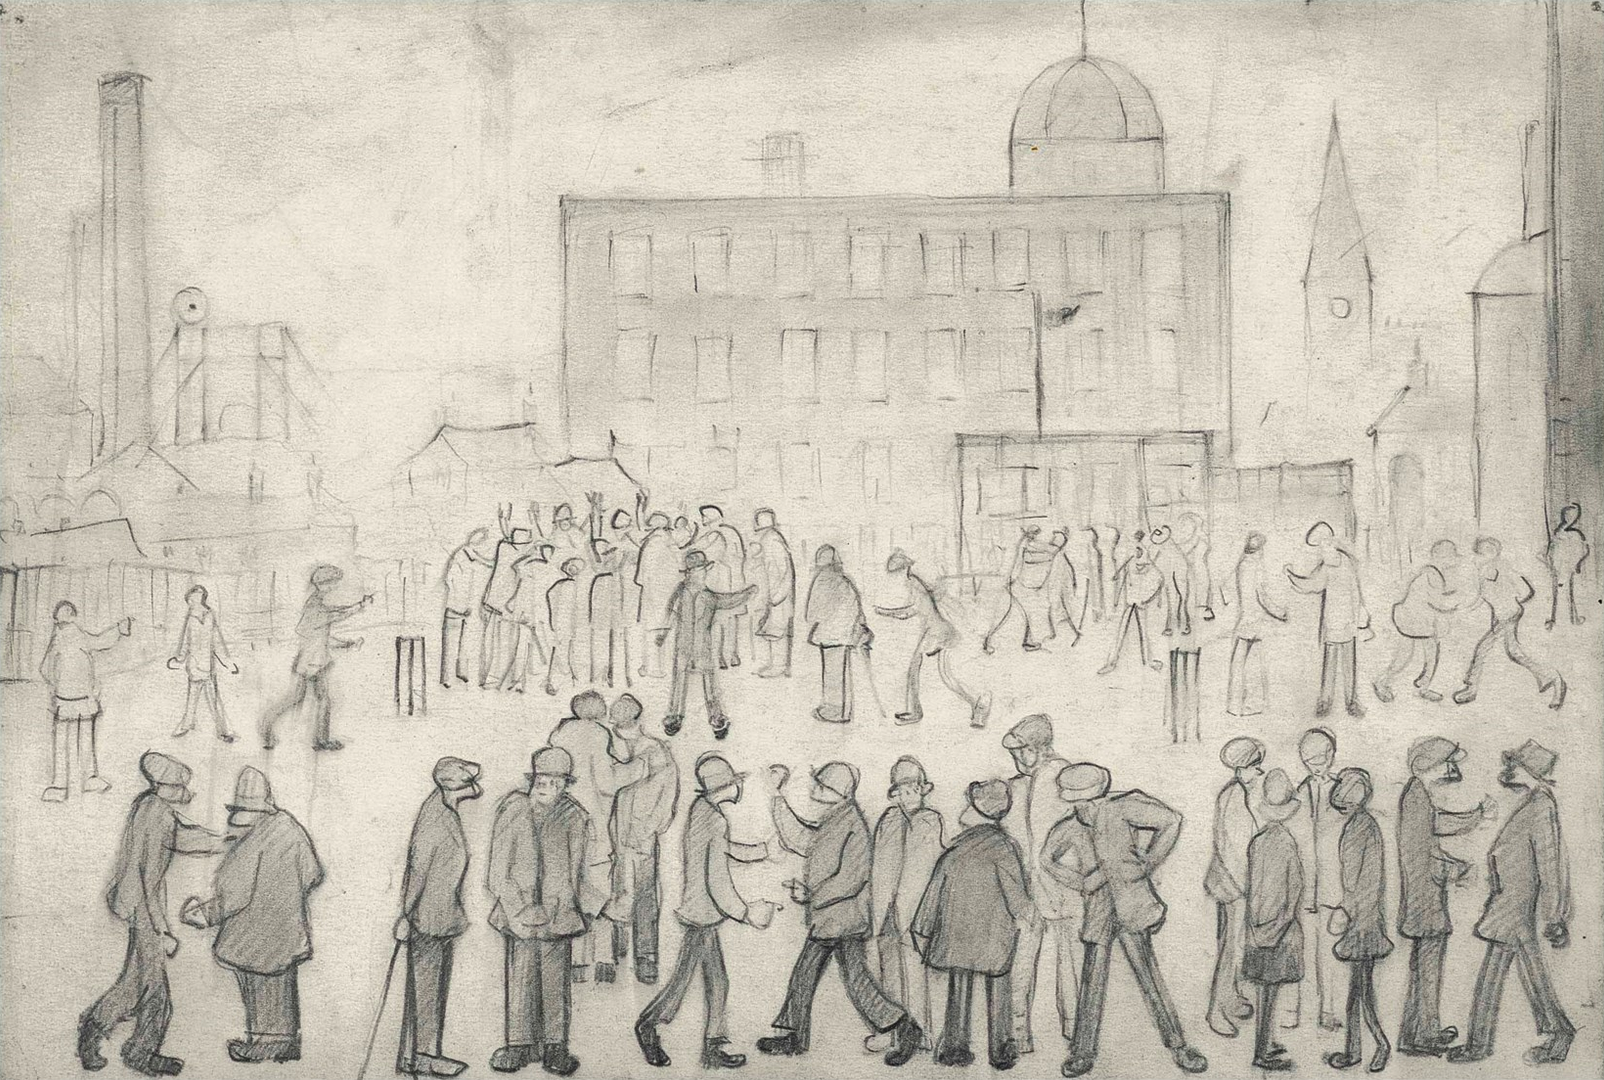 The Mill, Lunchtime; a Cricket Match (circa 1940) by Laurence Stephen Lowry (1887 - 1976), English artist.